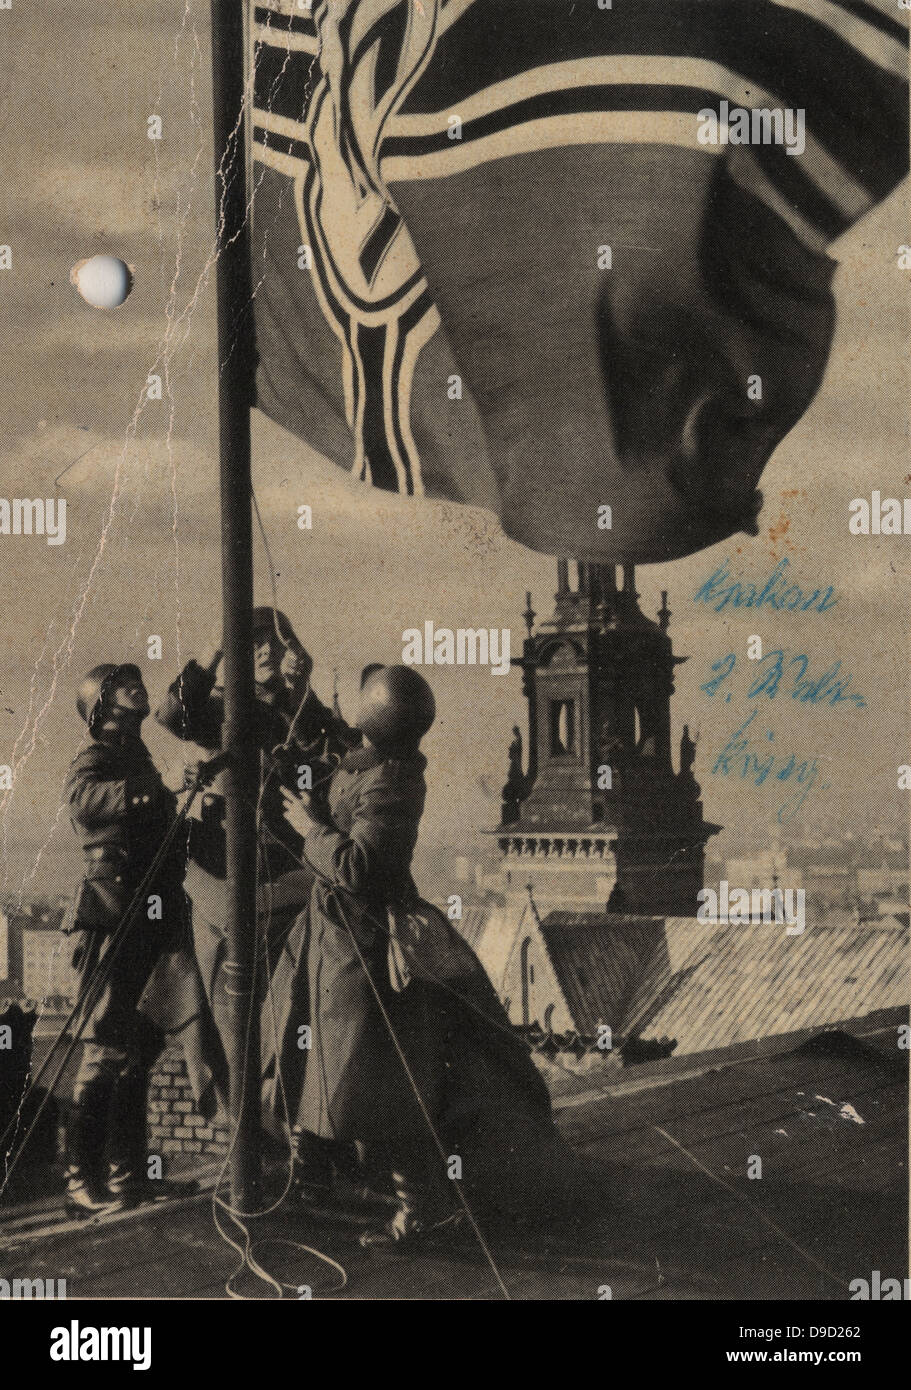 German troops hoising the Nazi flag in Cracow (Krakow), Poland, 1939. Official German postcard, World War II. Stock Photo